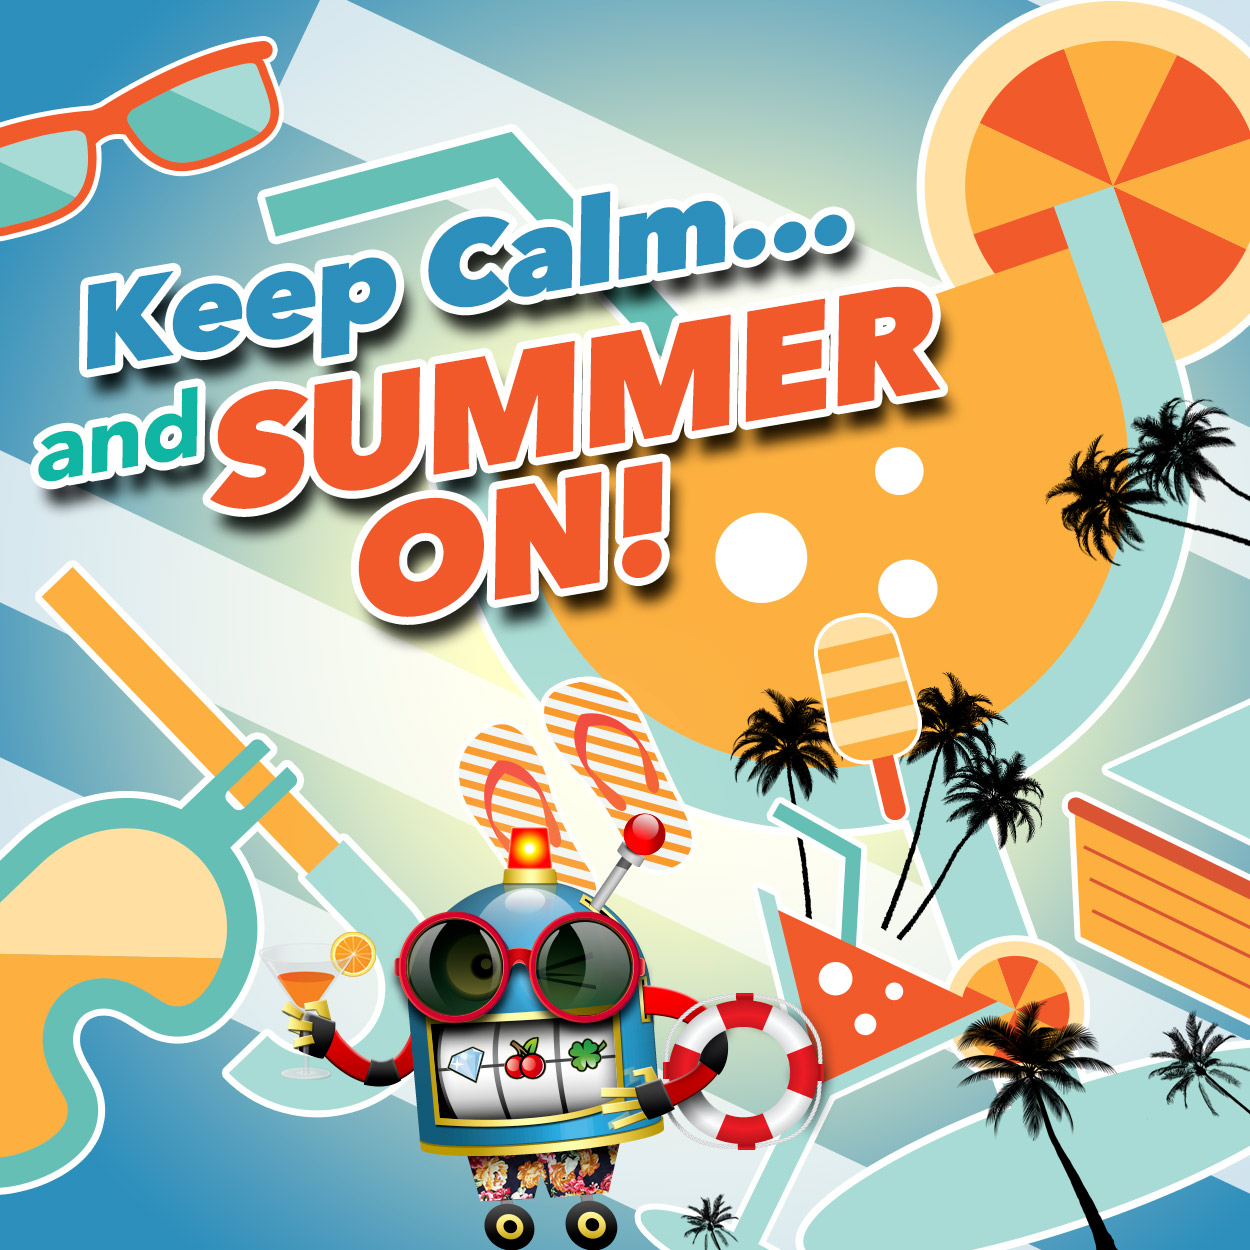 Keep Calm and Bring On the Summer!